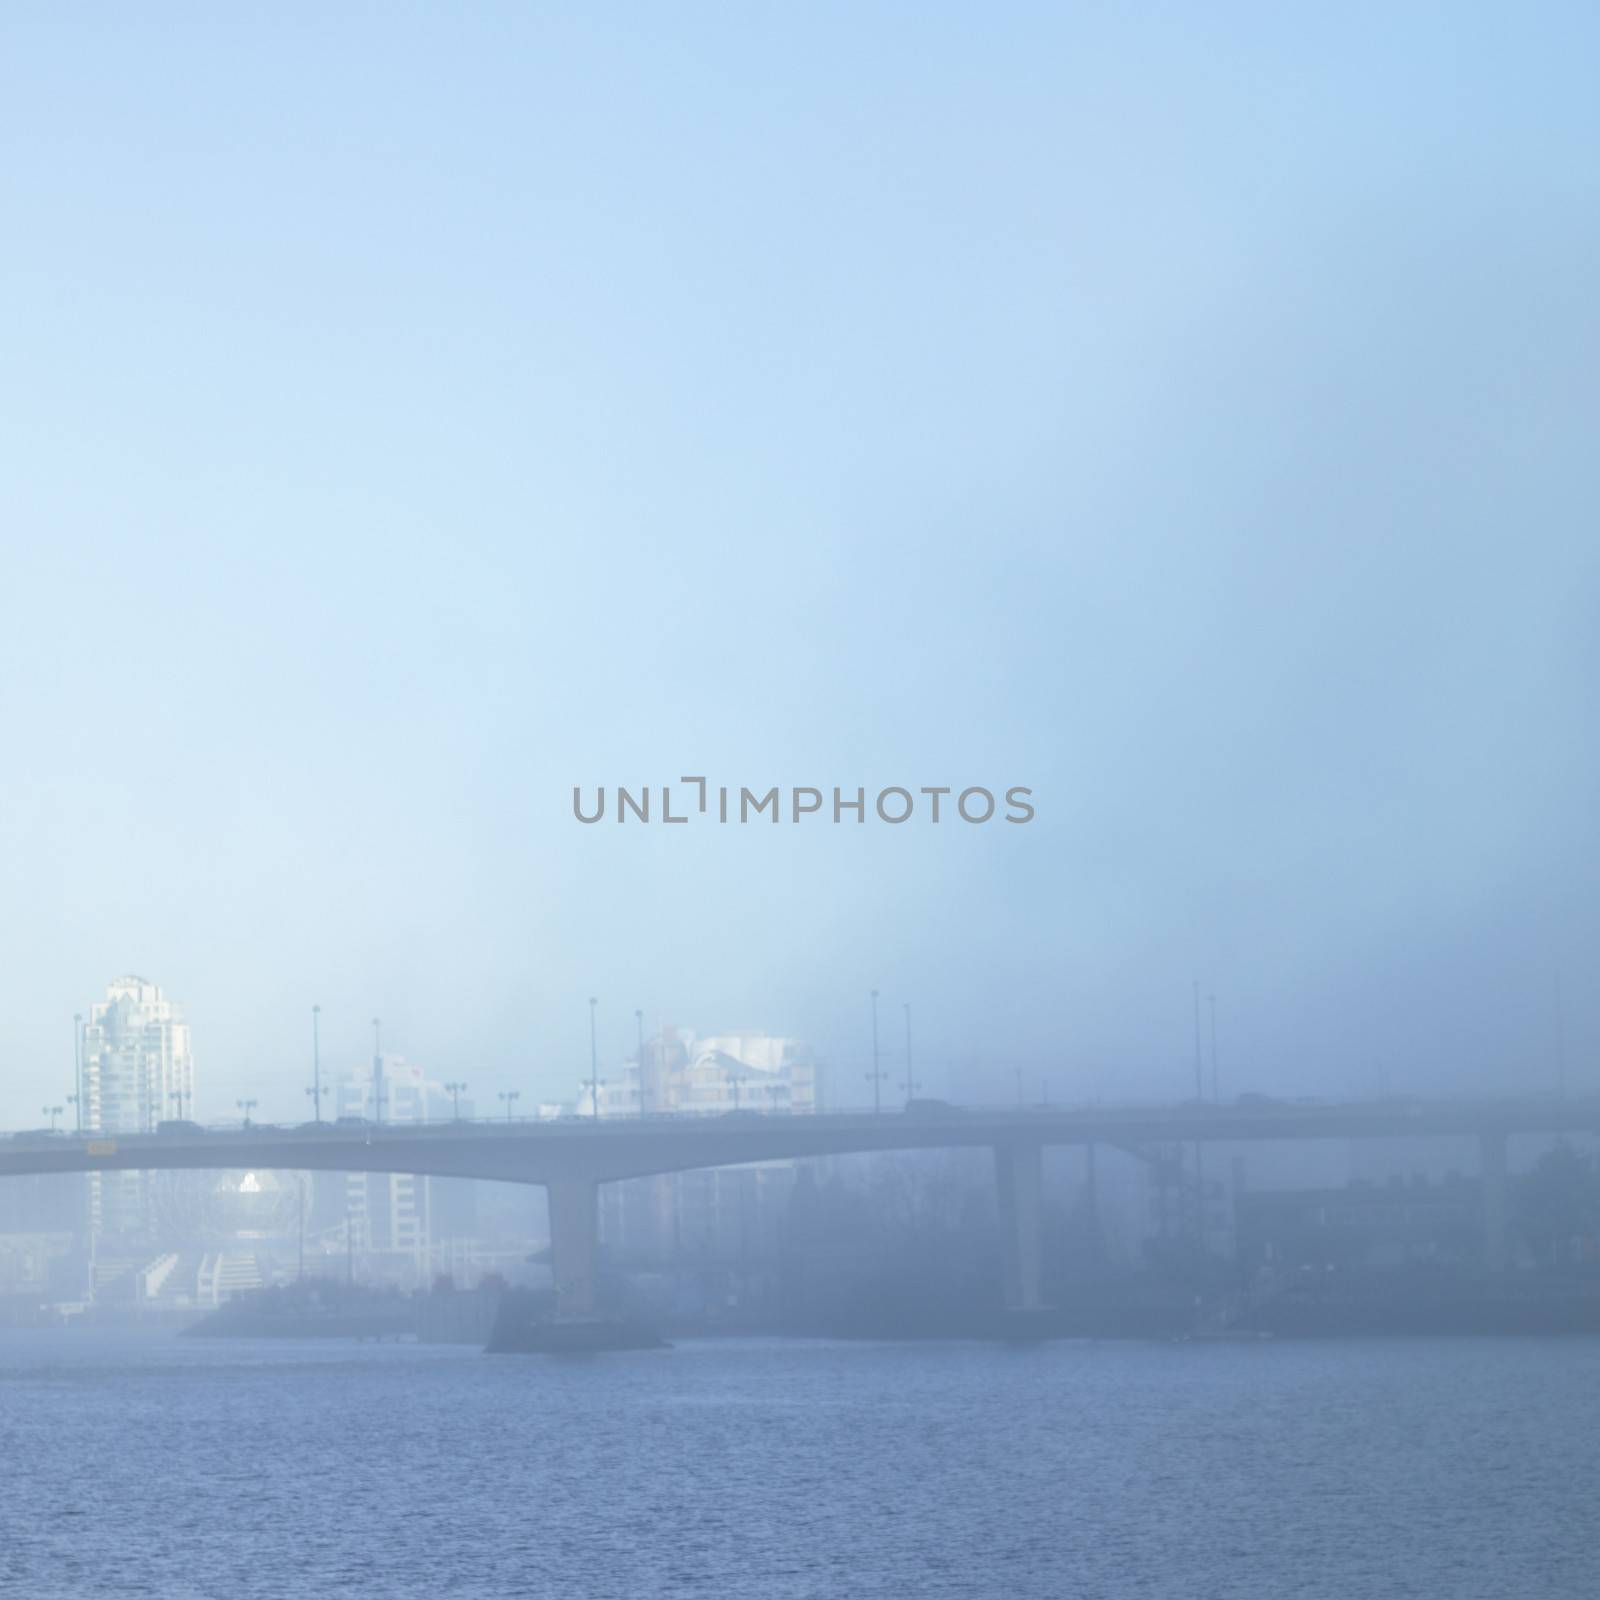 Bridge and cityscape on a foggy day.